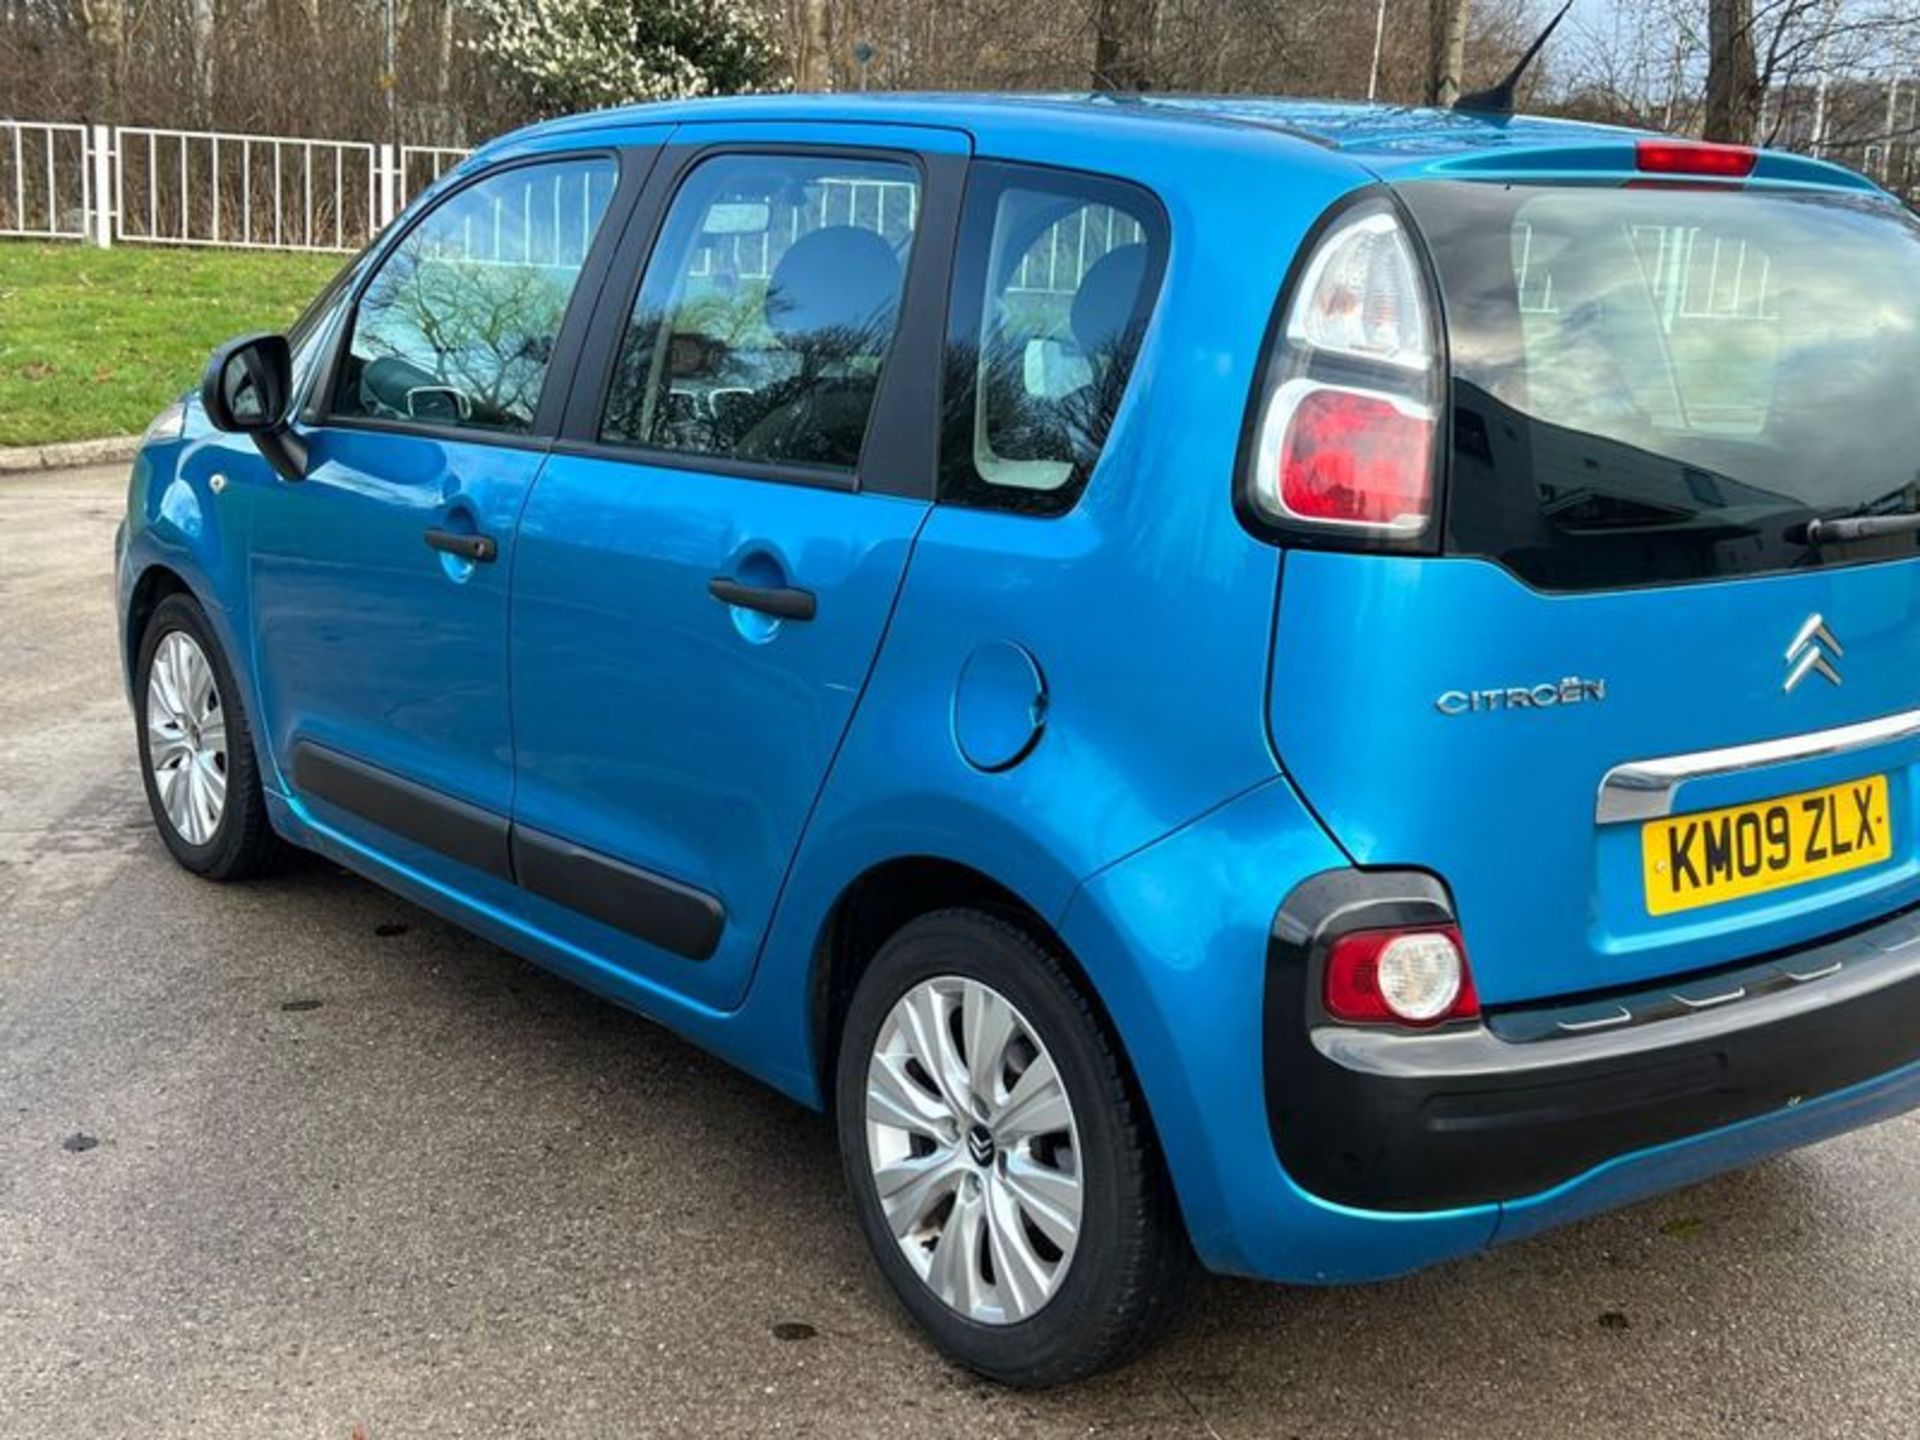 CITROEN C3 PICASSO 1.4 VTI VTR+ EURO 4 5DR 2009 (09 REG) - SPARES AND REPAIRS - Image 16 of 53